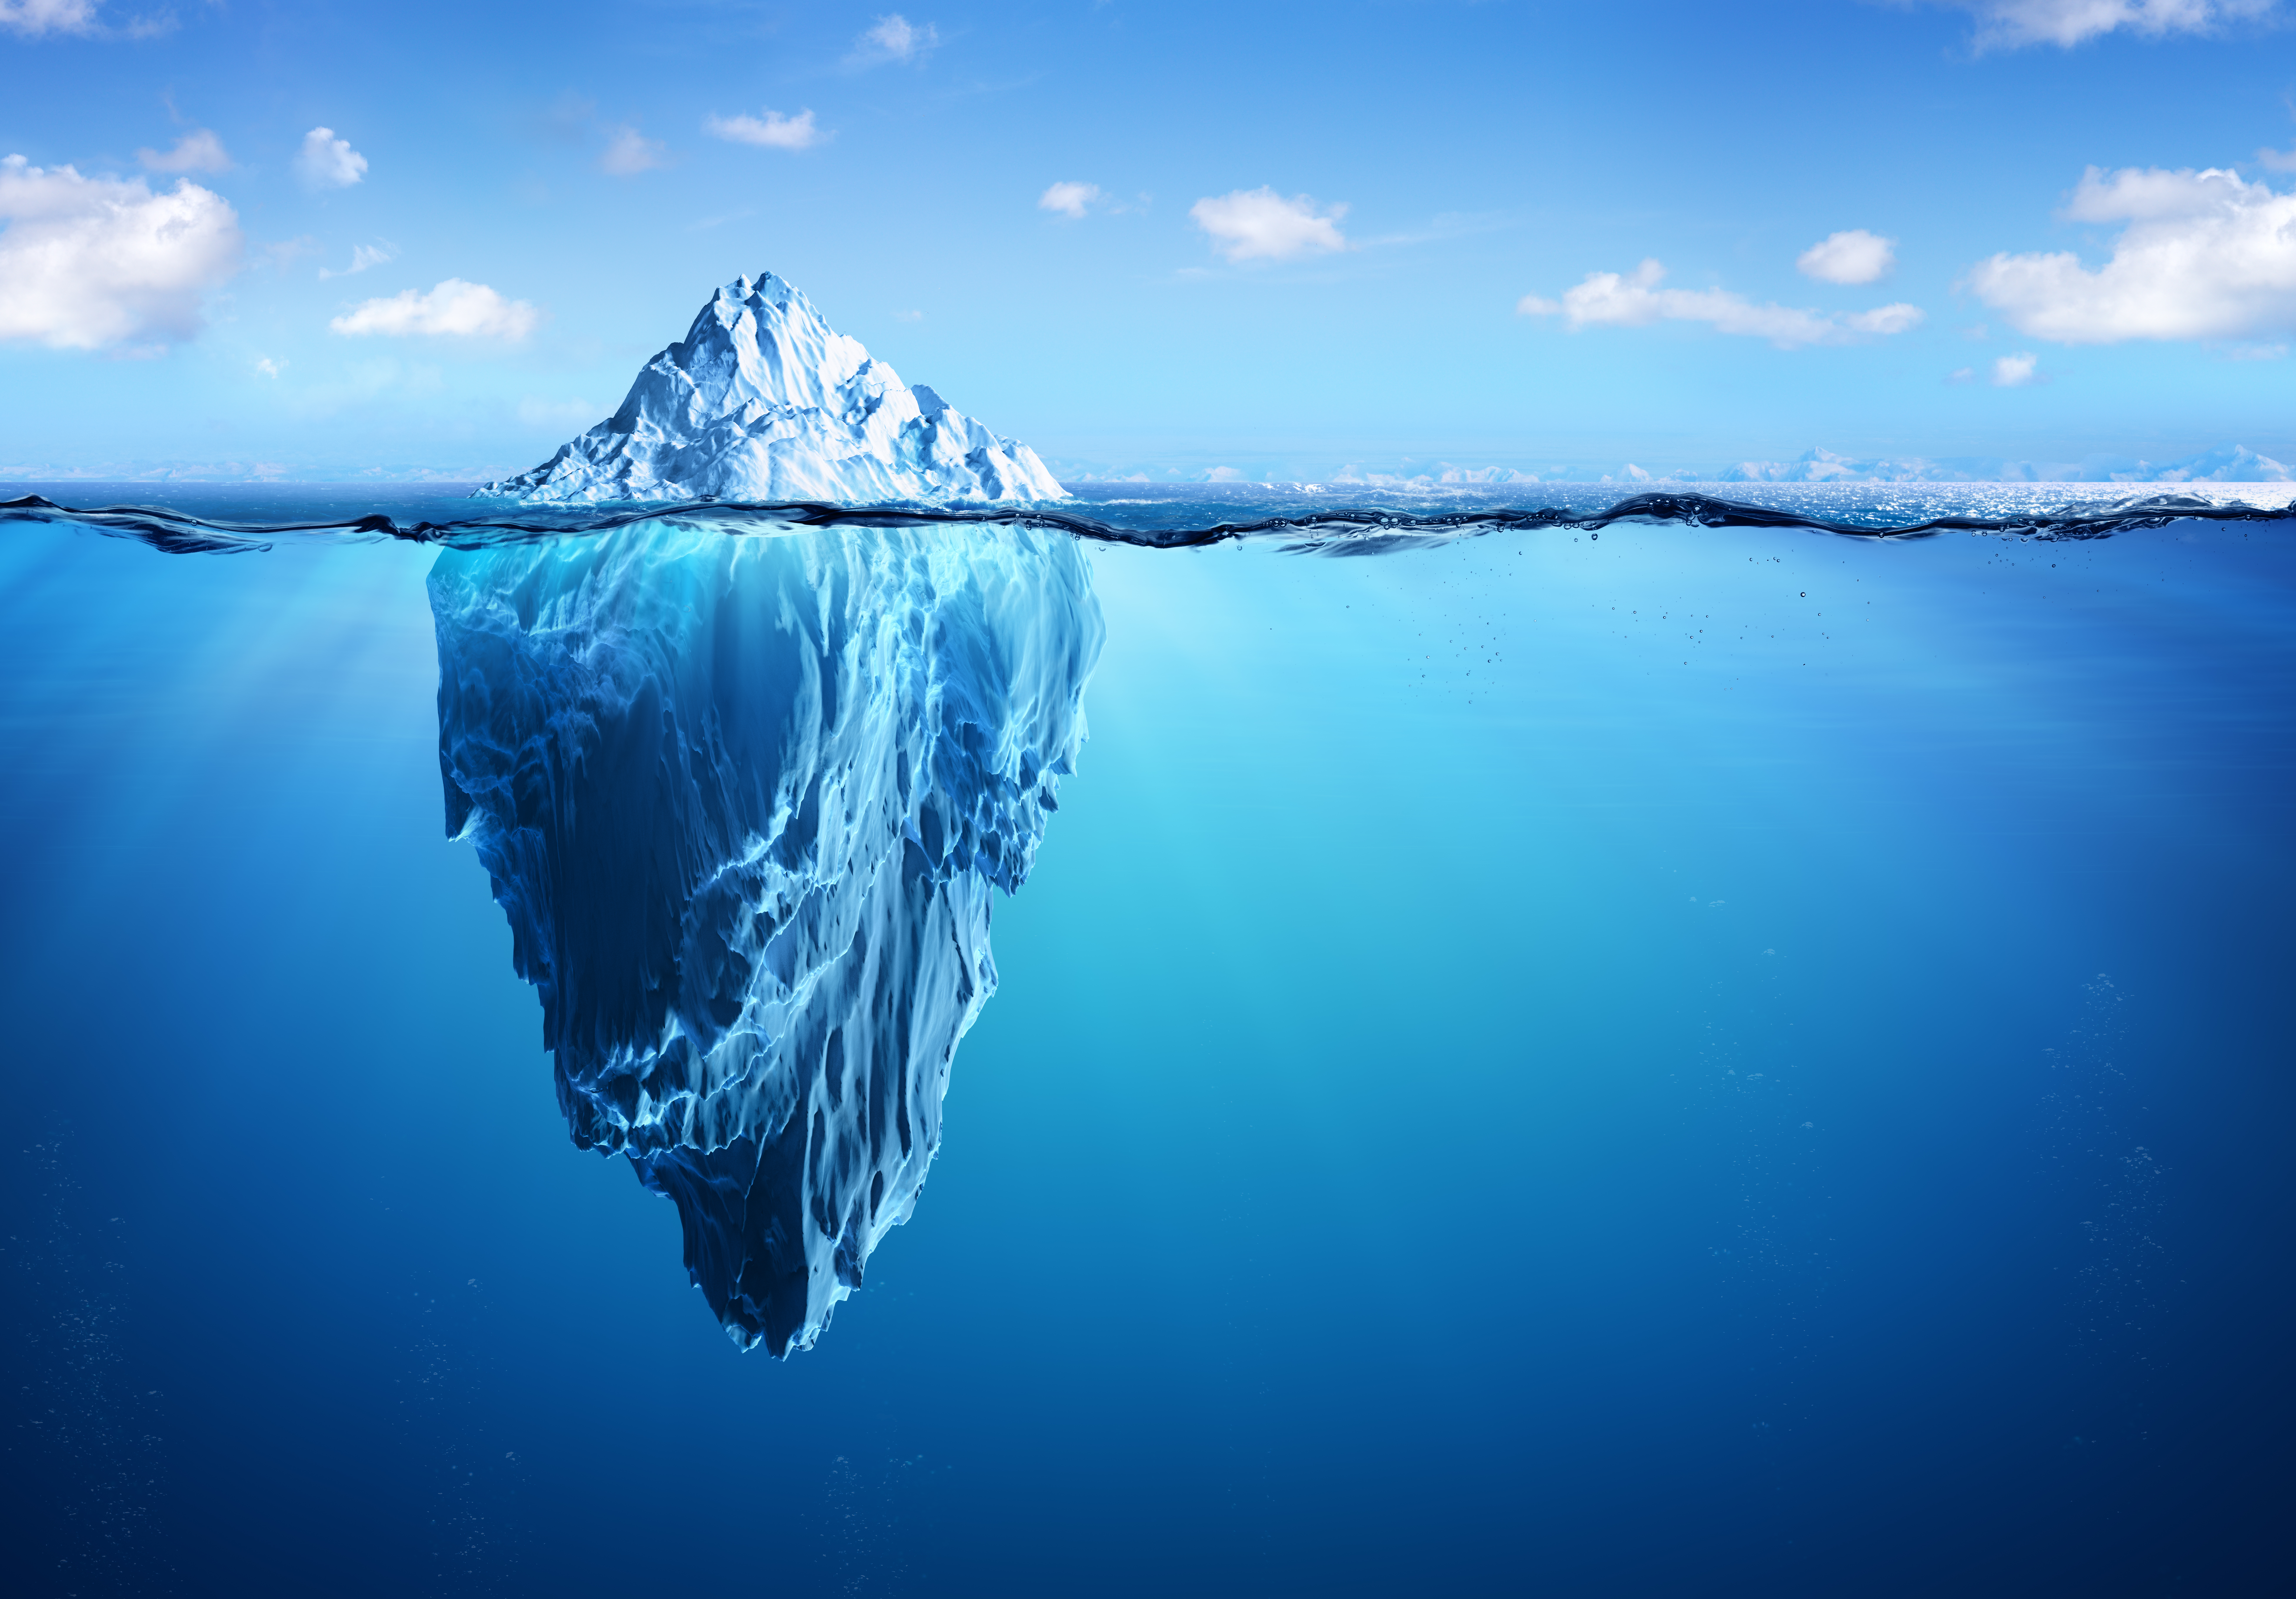 Visual metaphor of an iceberg floating in the ocean, illustrating the concept of hidden depths with a significant portion underwater, often used to represent the idea that there's more to something than meets the eye.